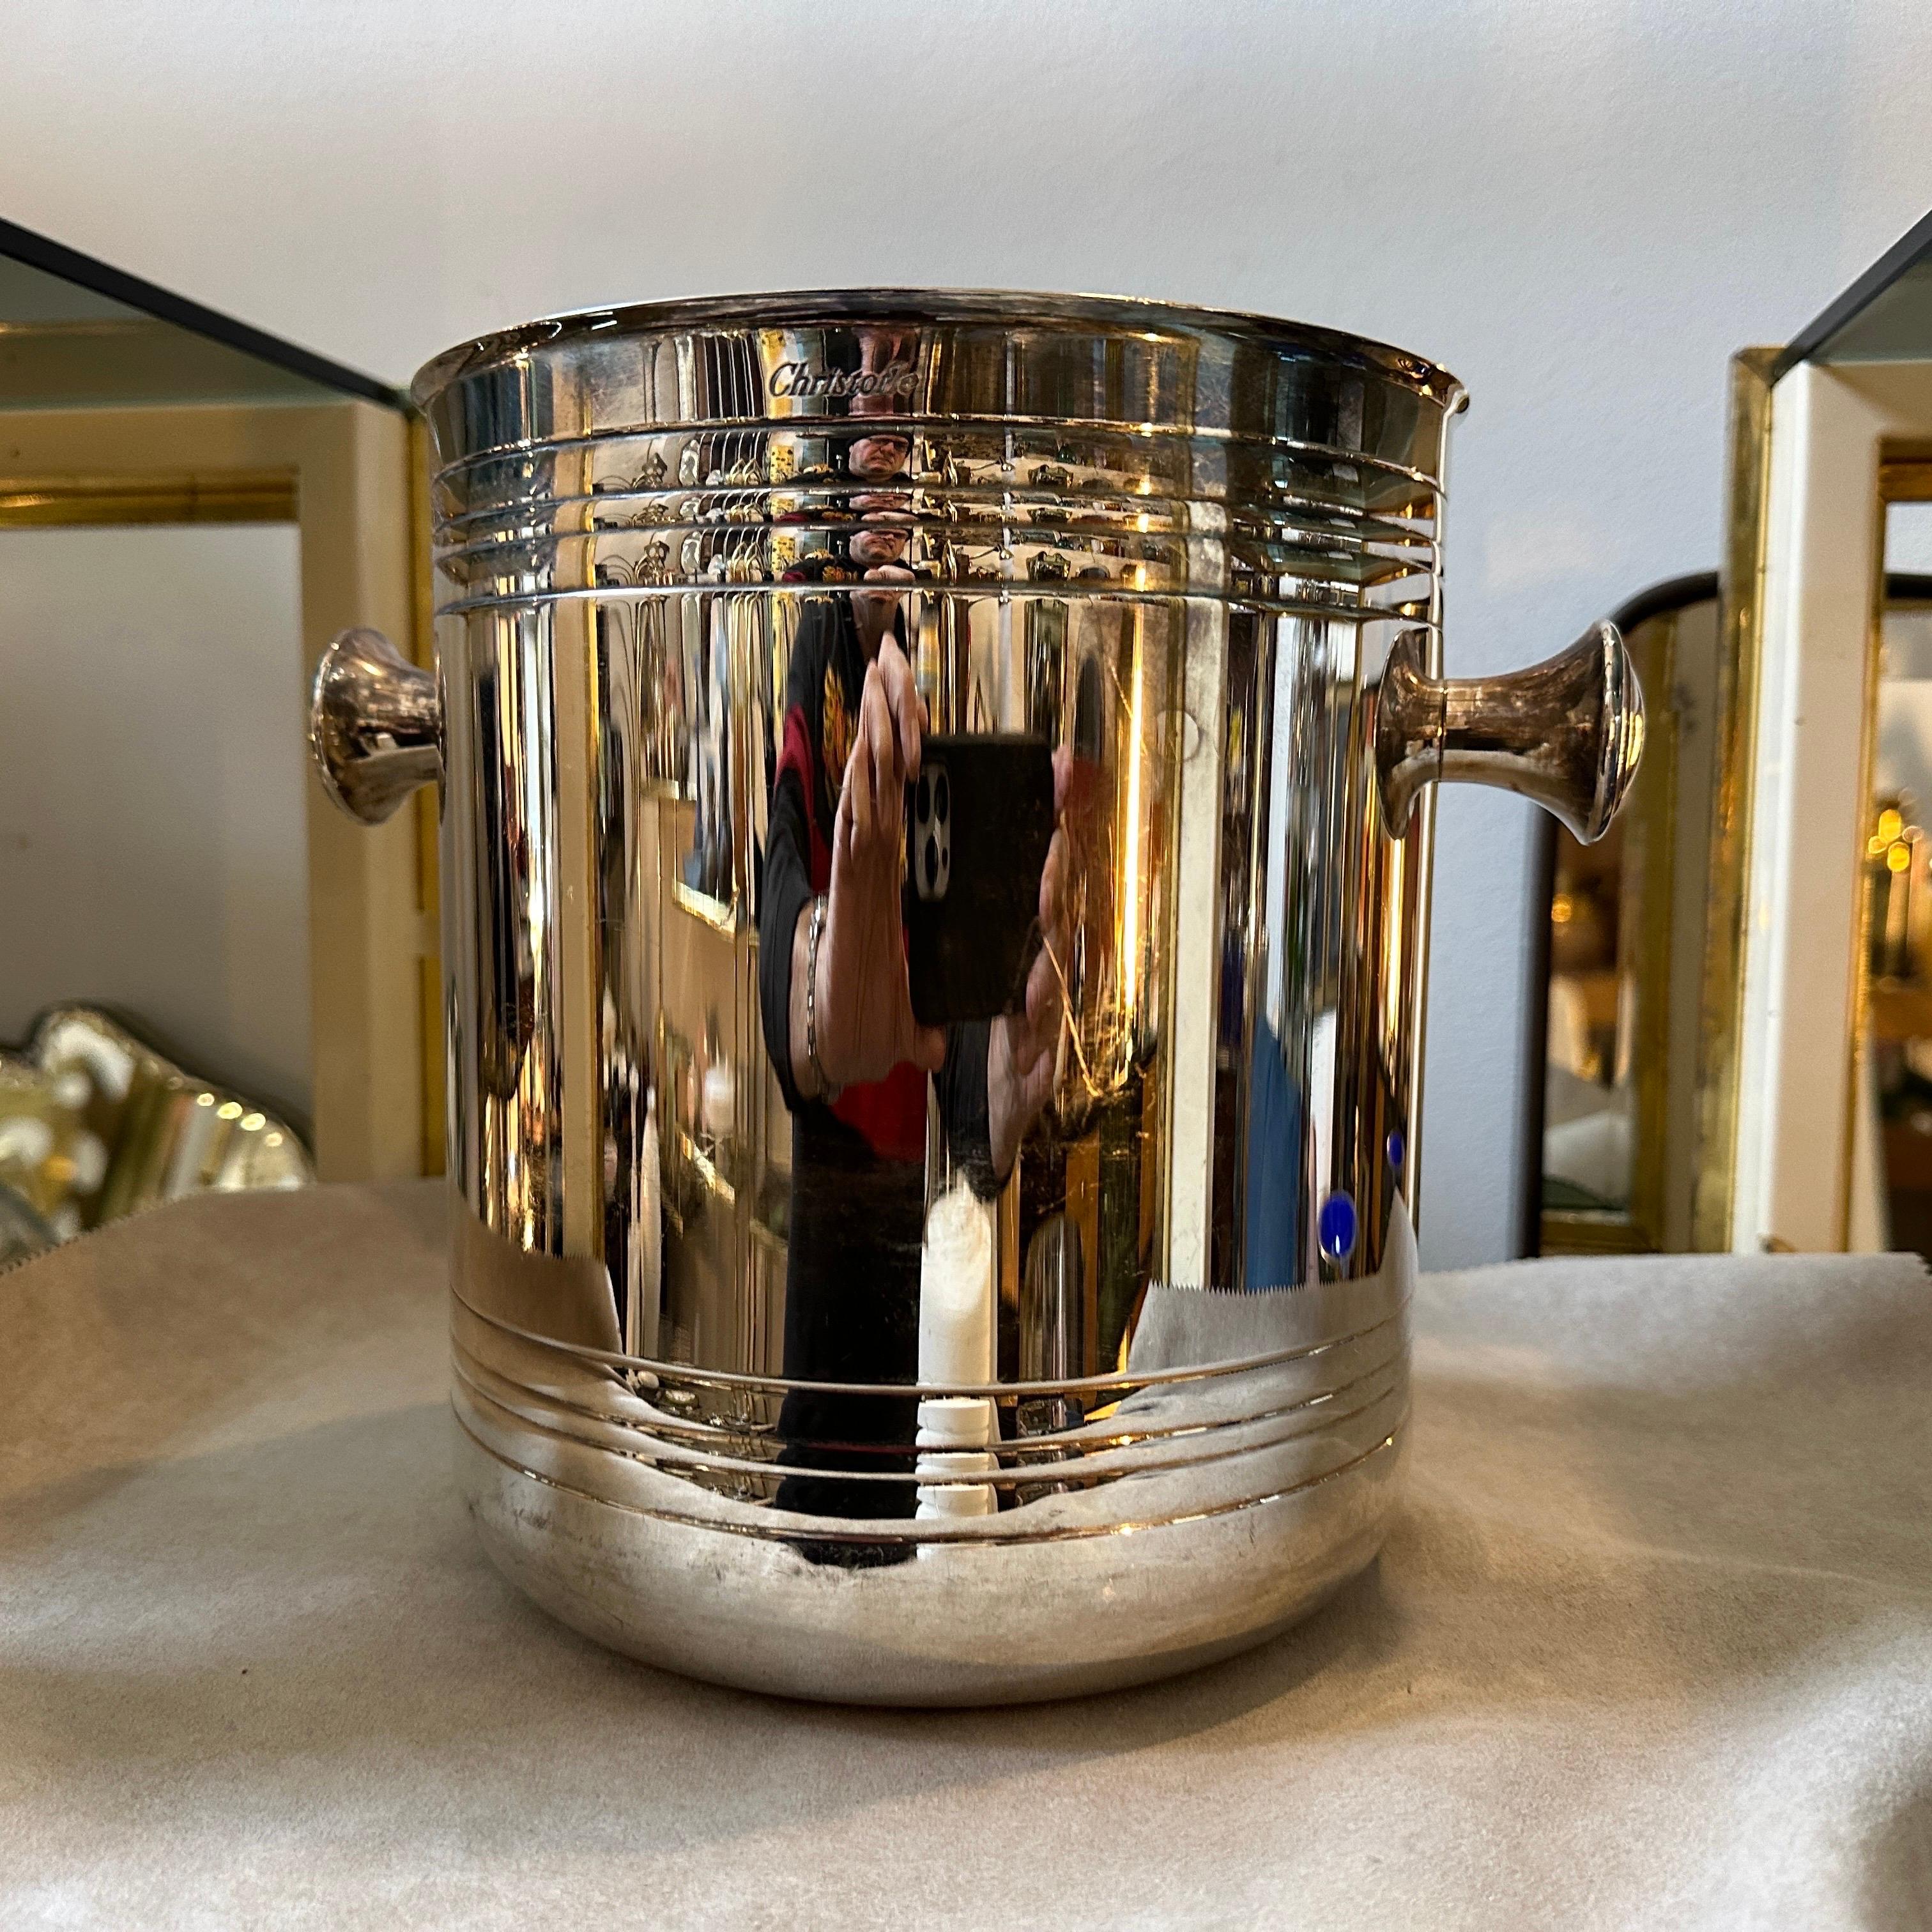 1980s Modernist Silver Plated French Wine Cooler by Christofle For Sale 3